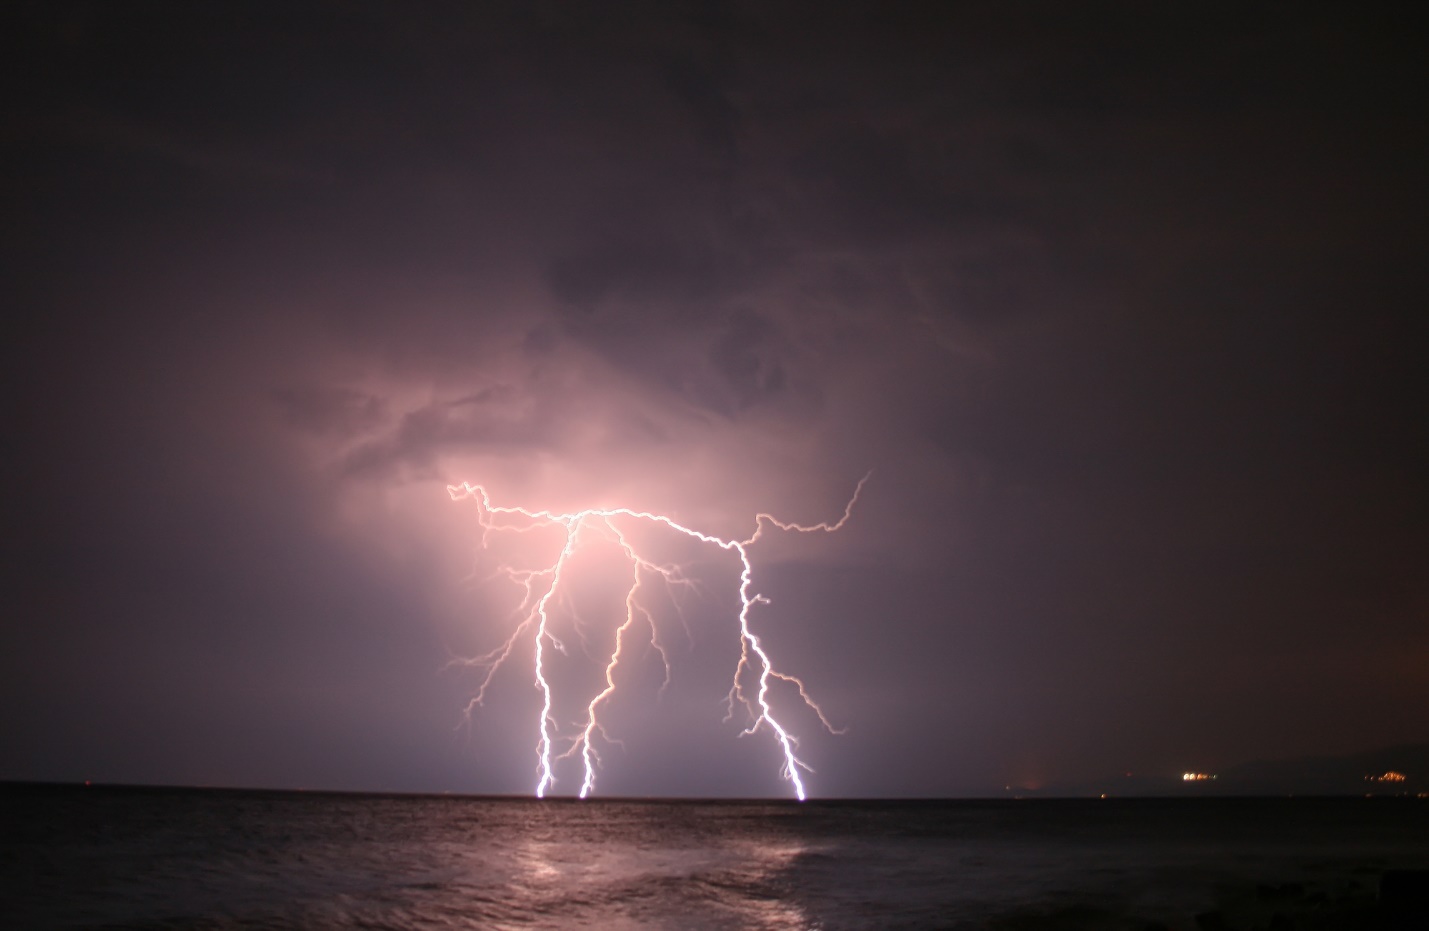 Lightning striking a body of water

Description automatically generated with medium confidence